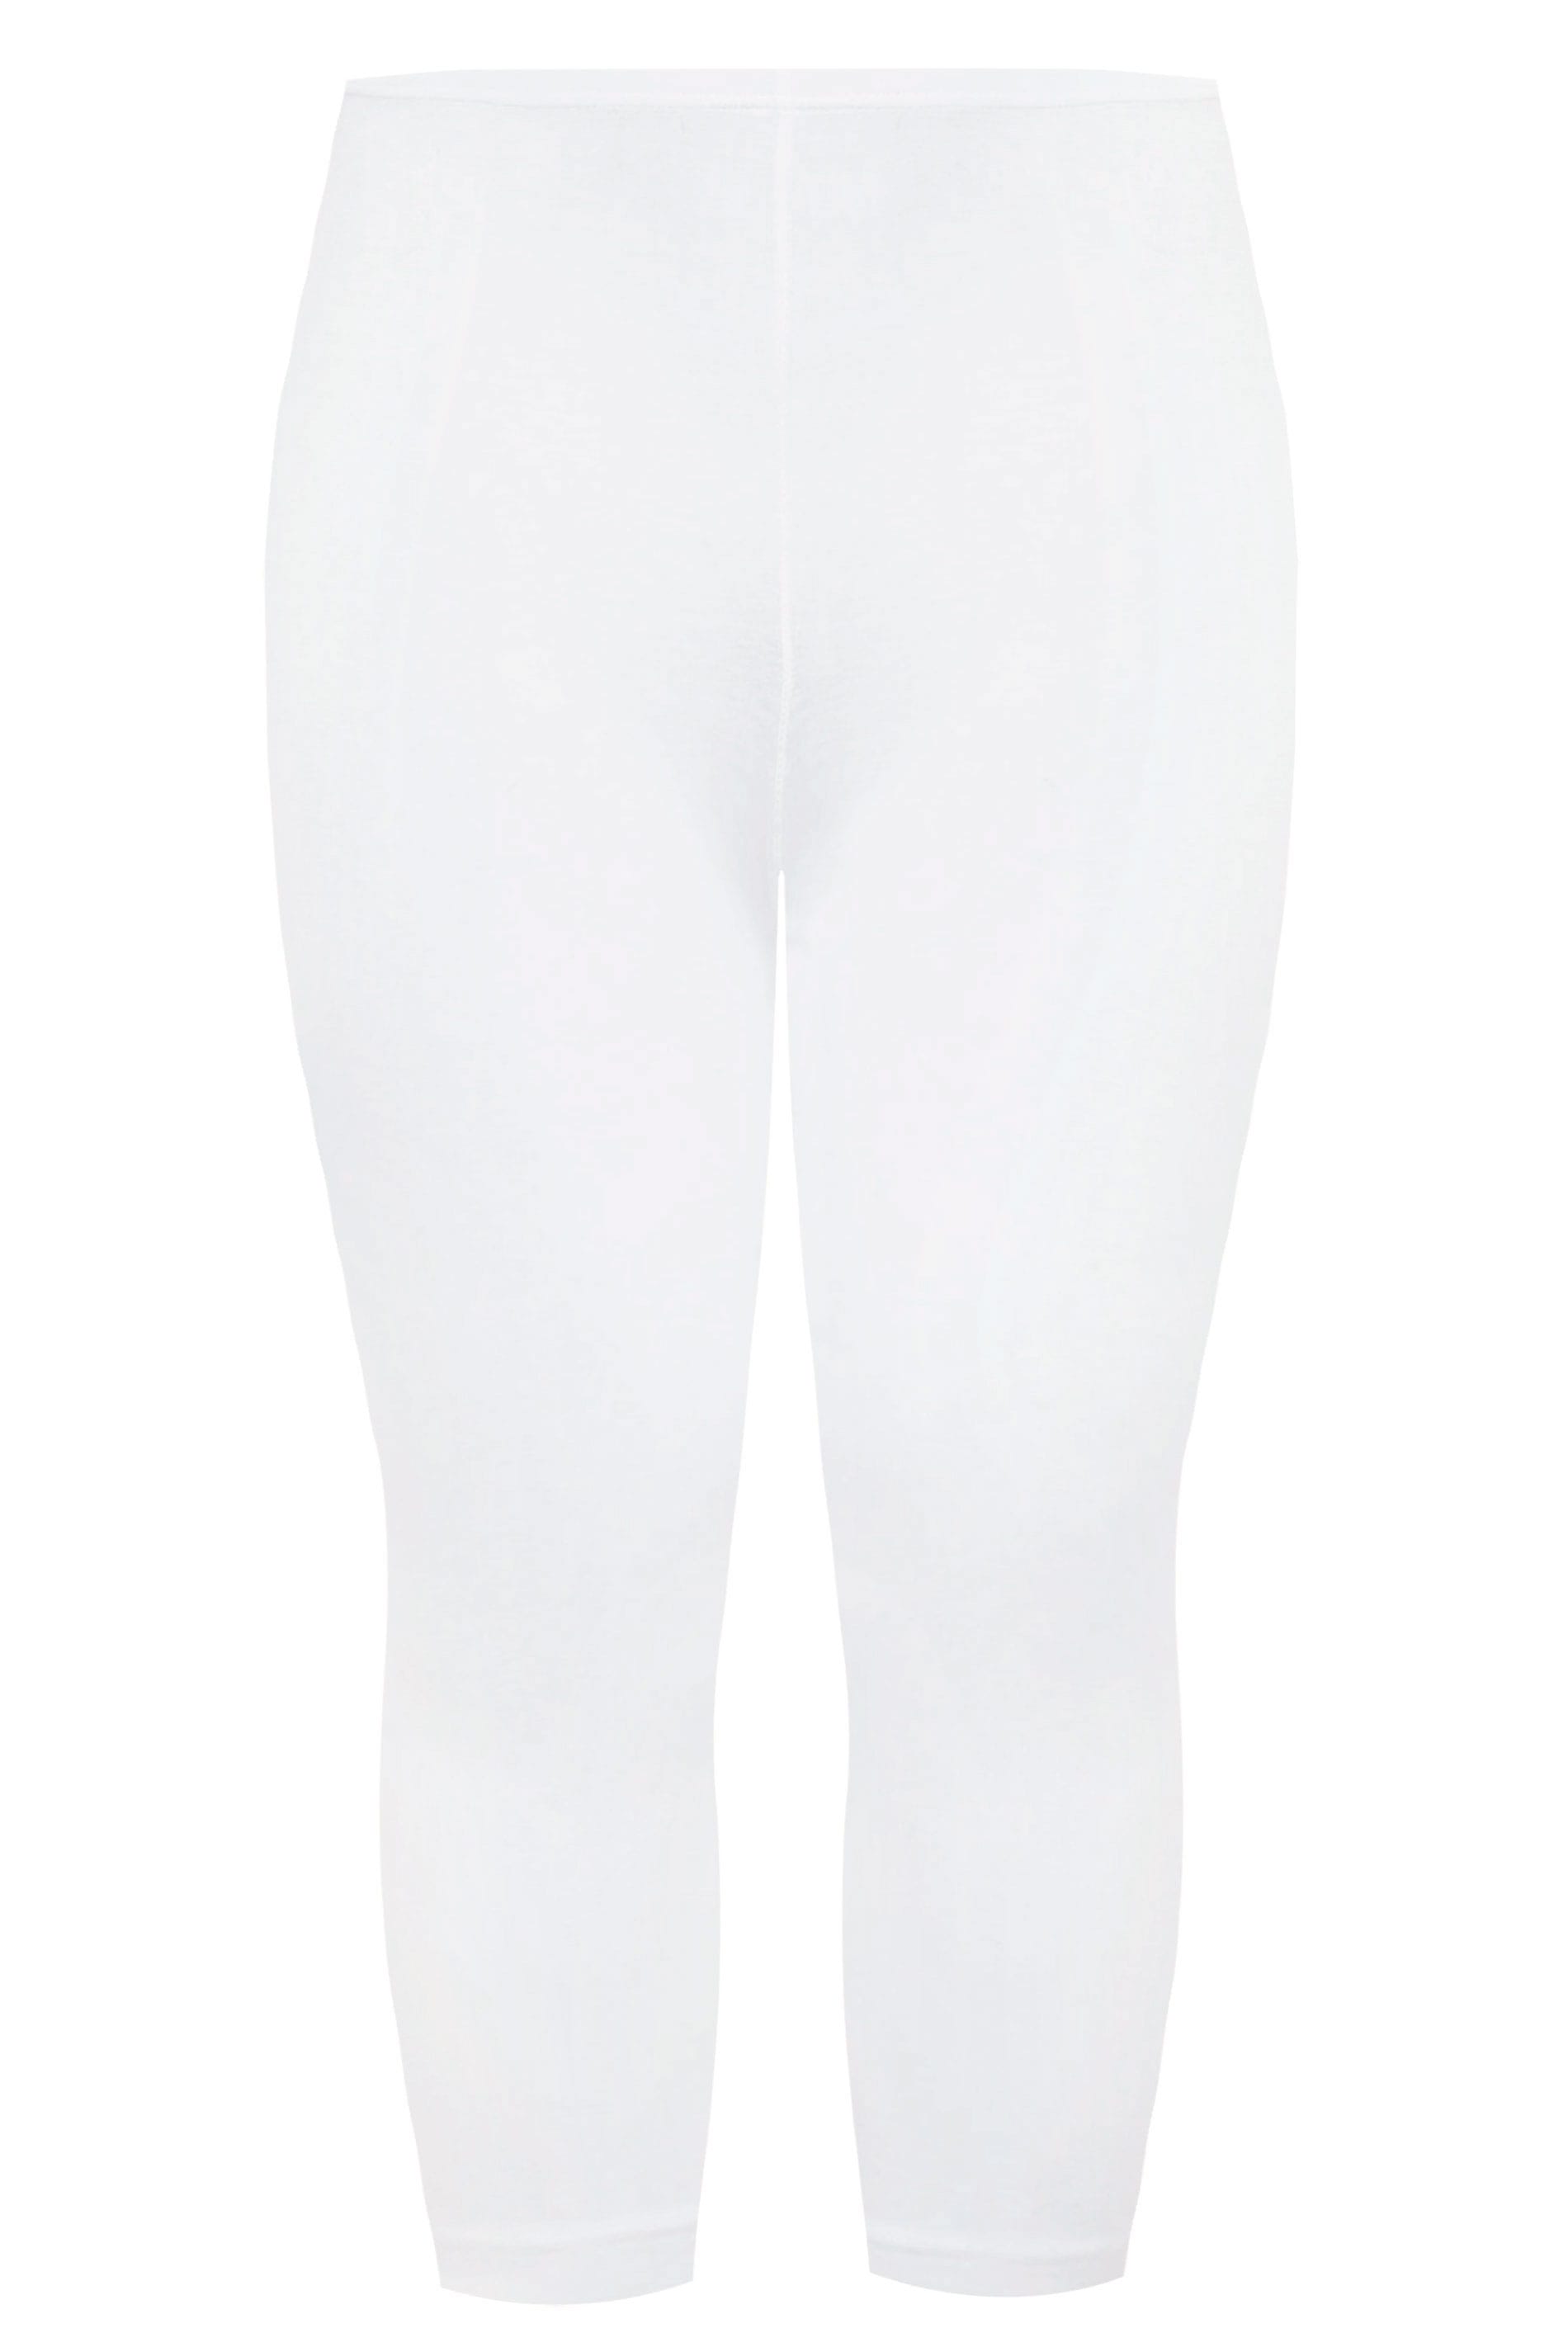 Long Tall Sally Tall 2 Pack Cotton Leggings in White